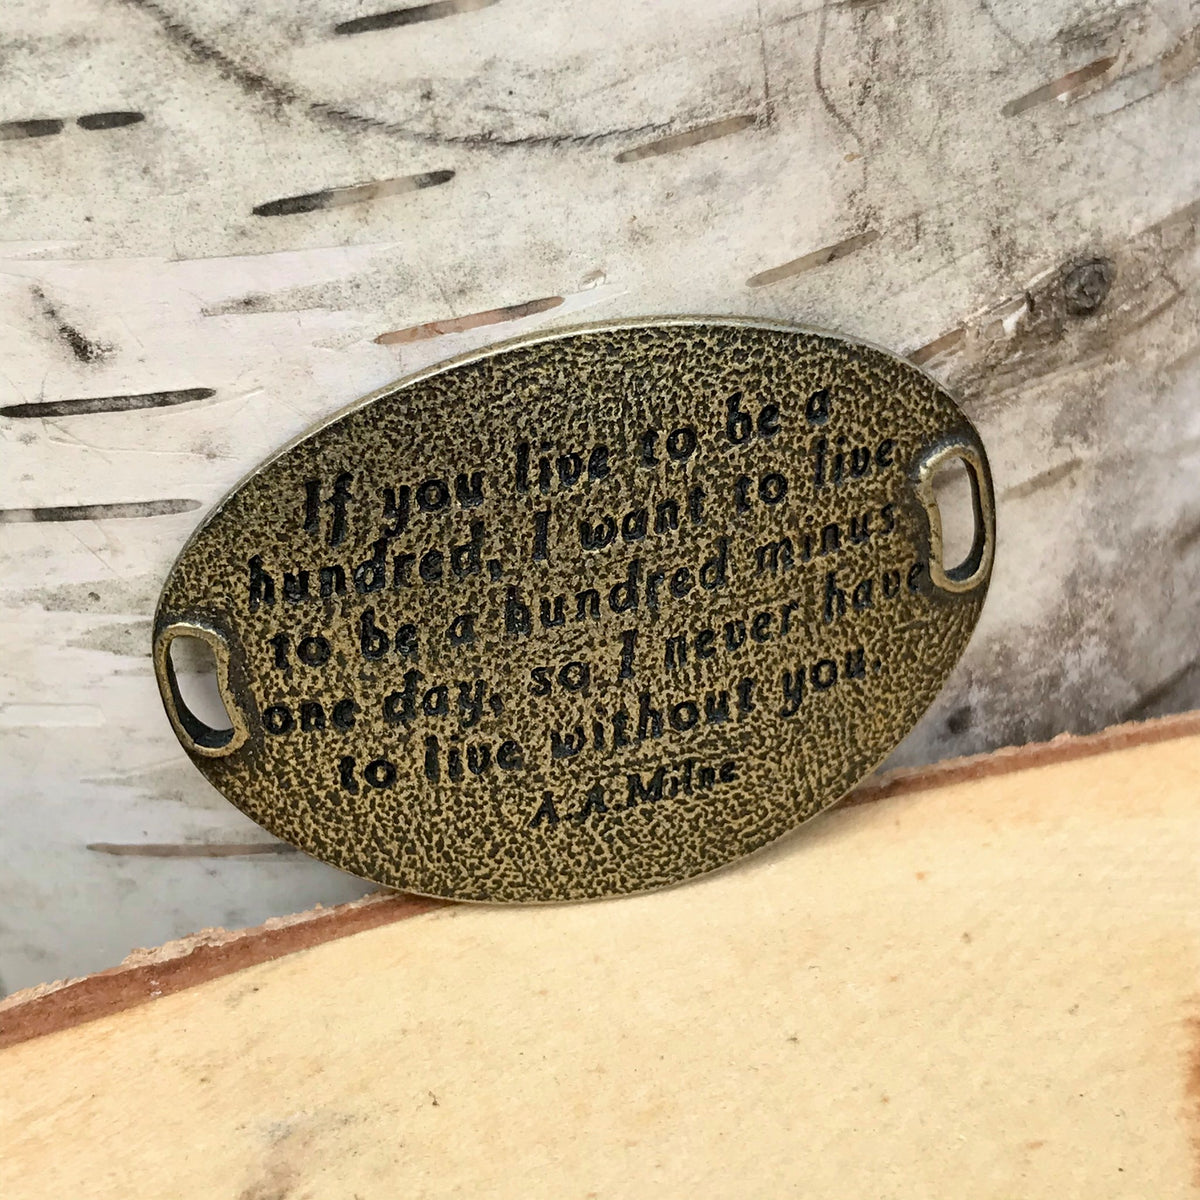 "If you live to be a hundred, I want to live to be a hundred minus one day, so I never have to live without you." -A.A. Milne (brass)